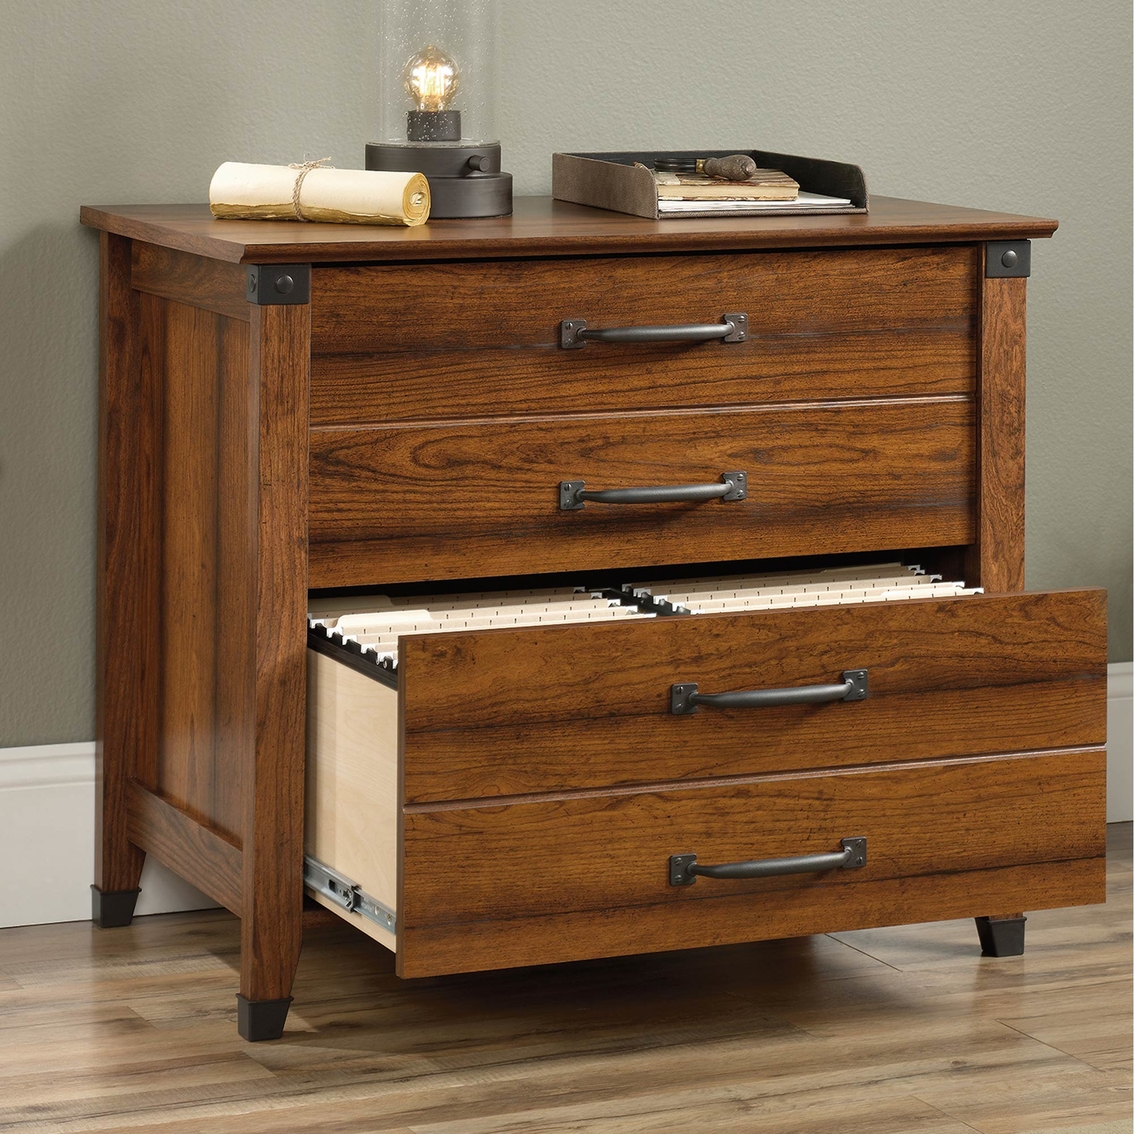 Sauder Carson Forge Lateral File Cabinet - Image 2 of 3